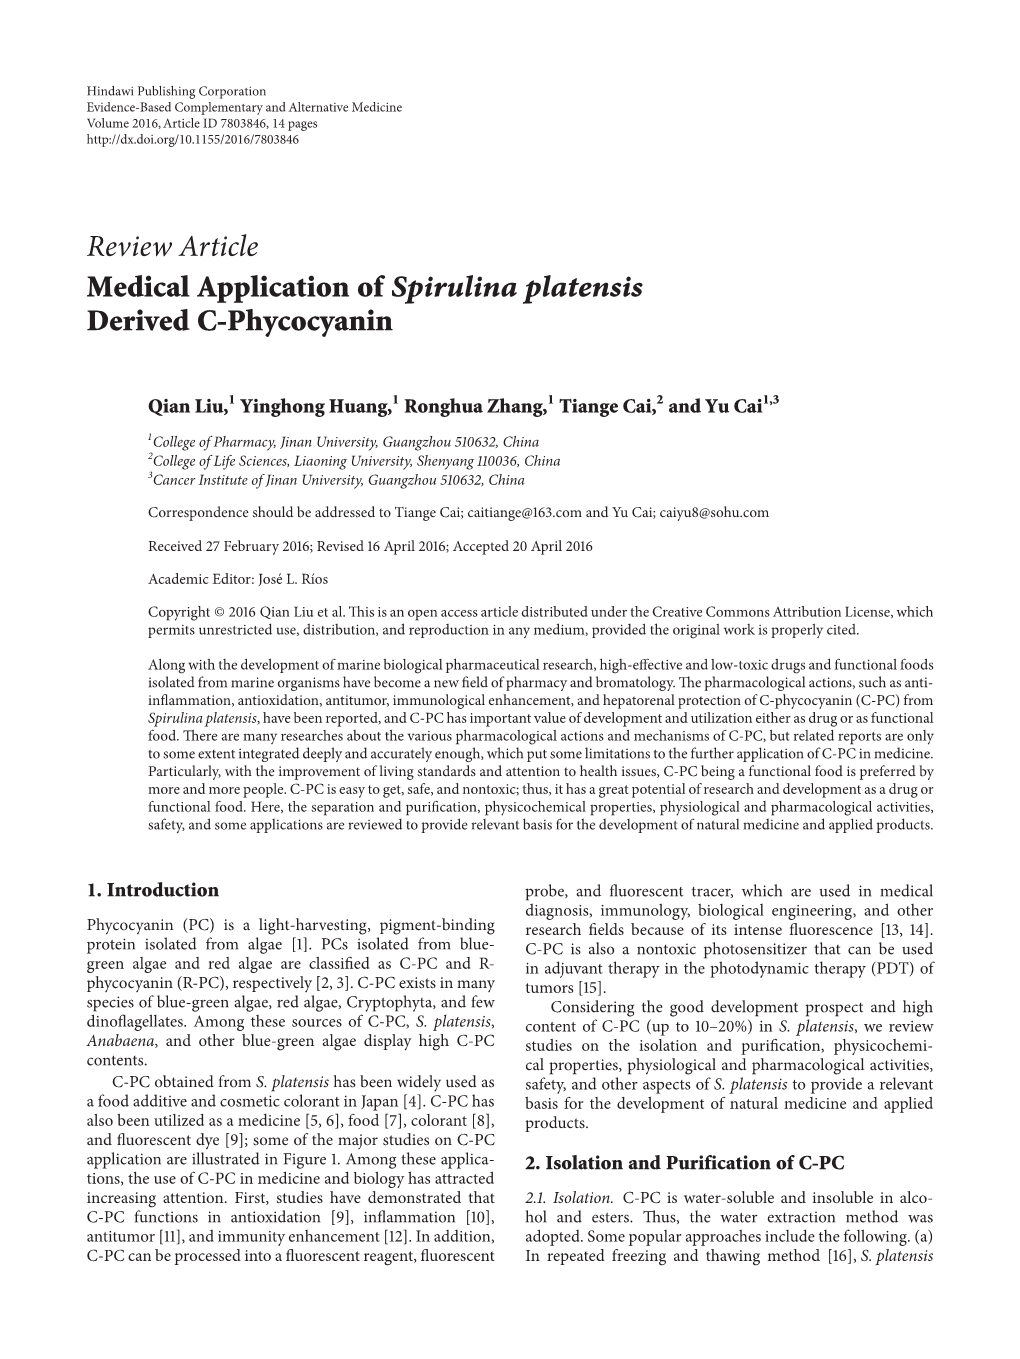 Review Article Medical Application of Spirulina Platensis Derived C-Phycocyanin